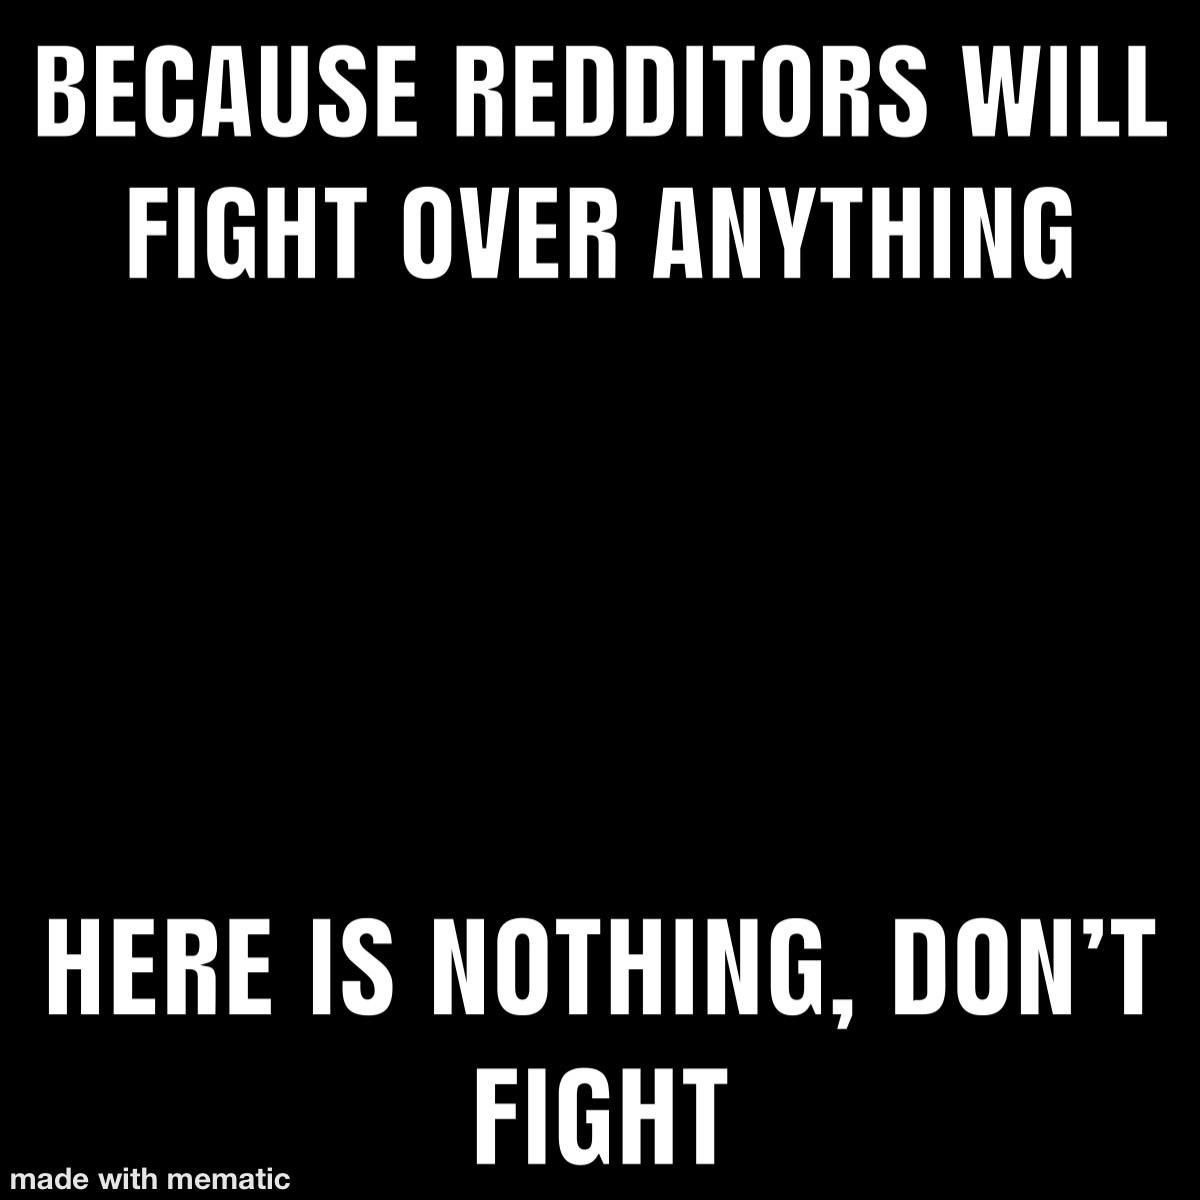 No fighting allowed